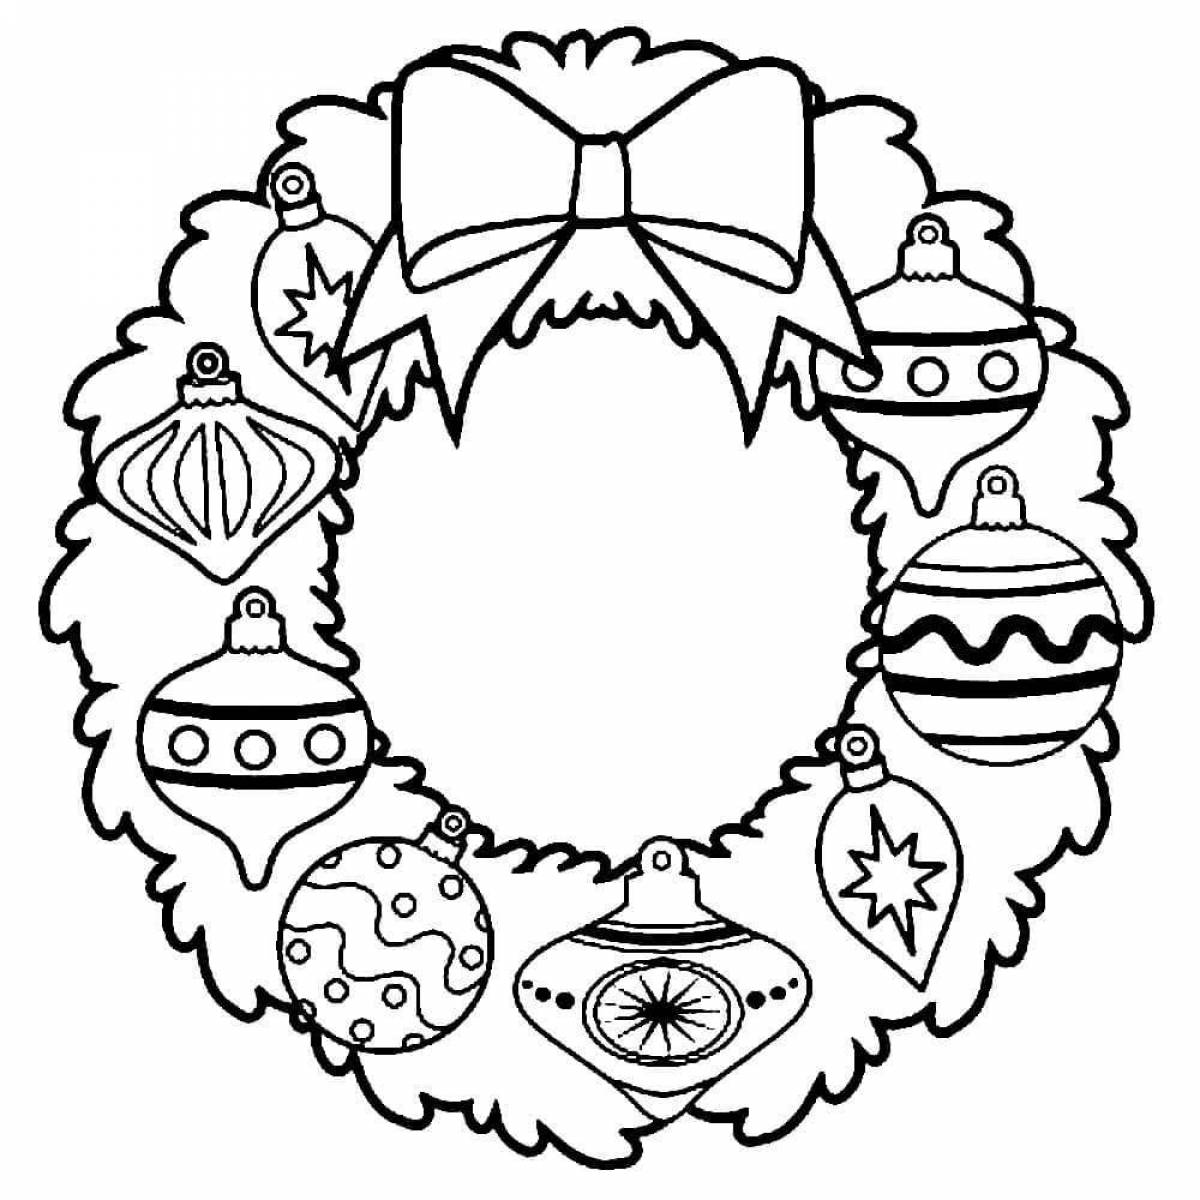 Coloring live Christmas wreath